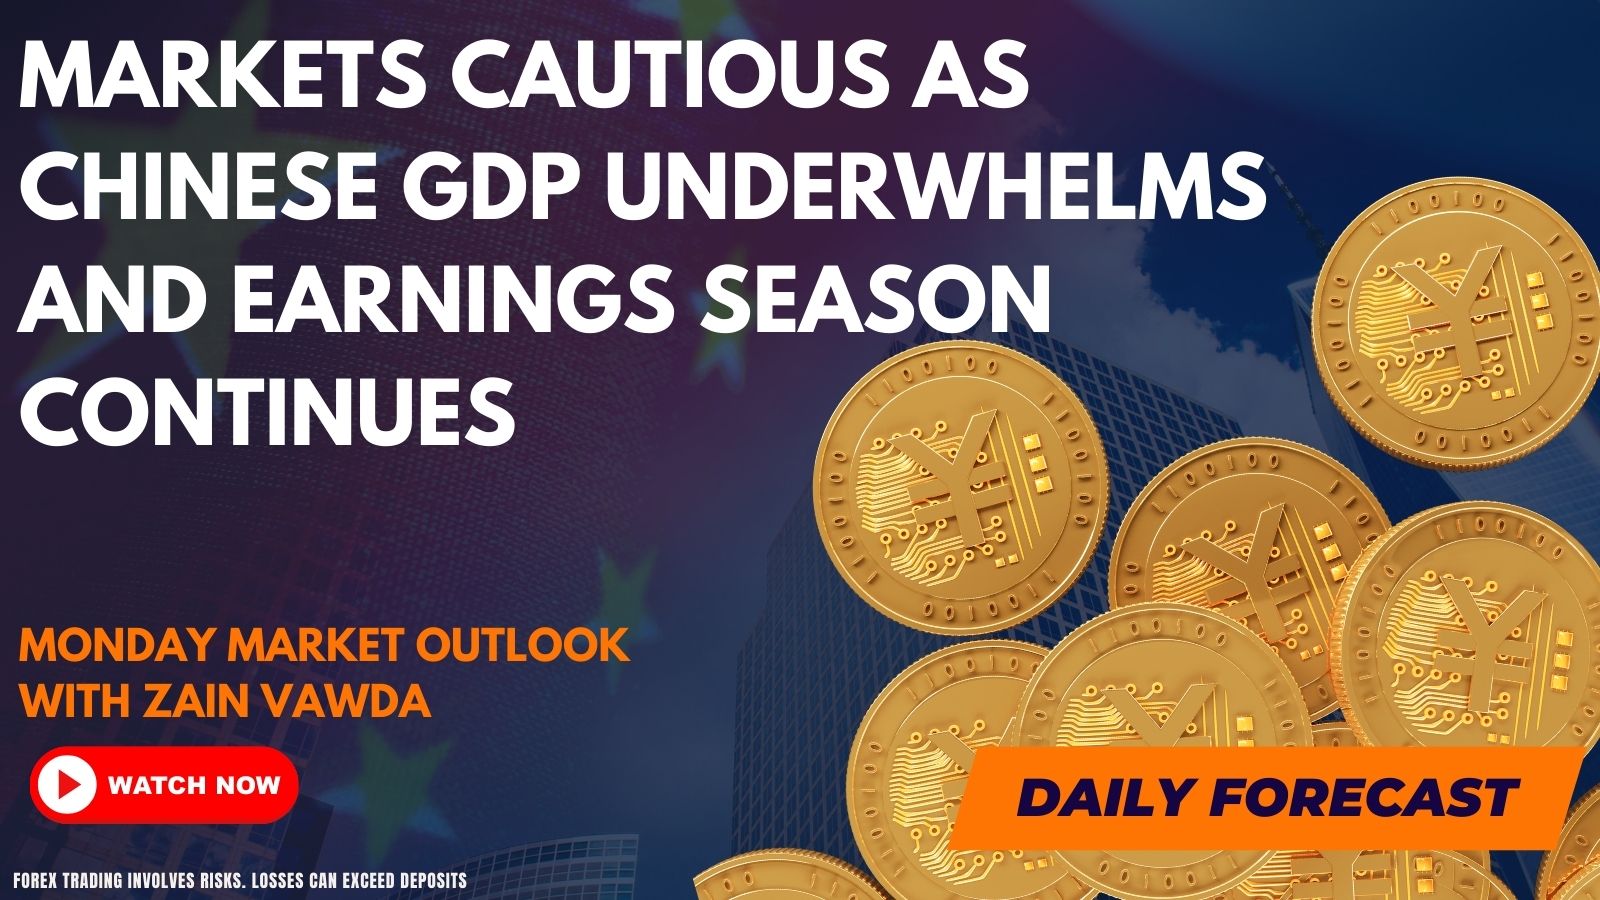 Markets Cautious as Chinese GDP Underwhelms and Earnings Season Continues